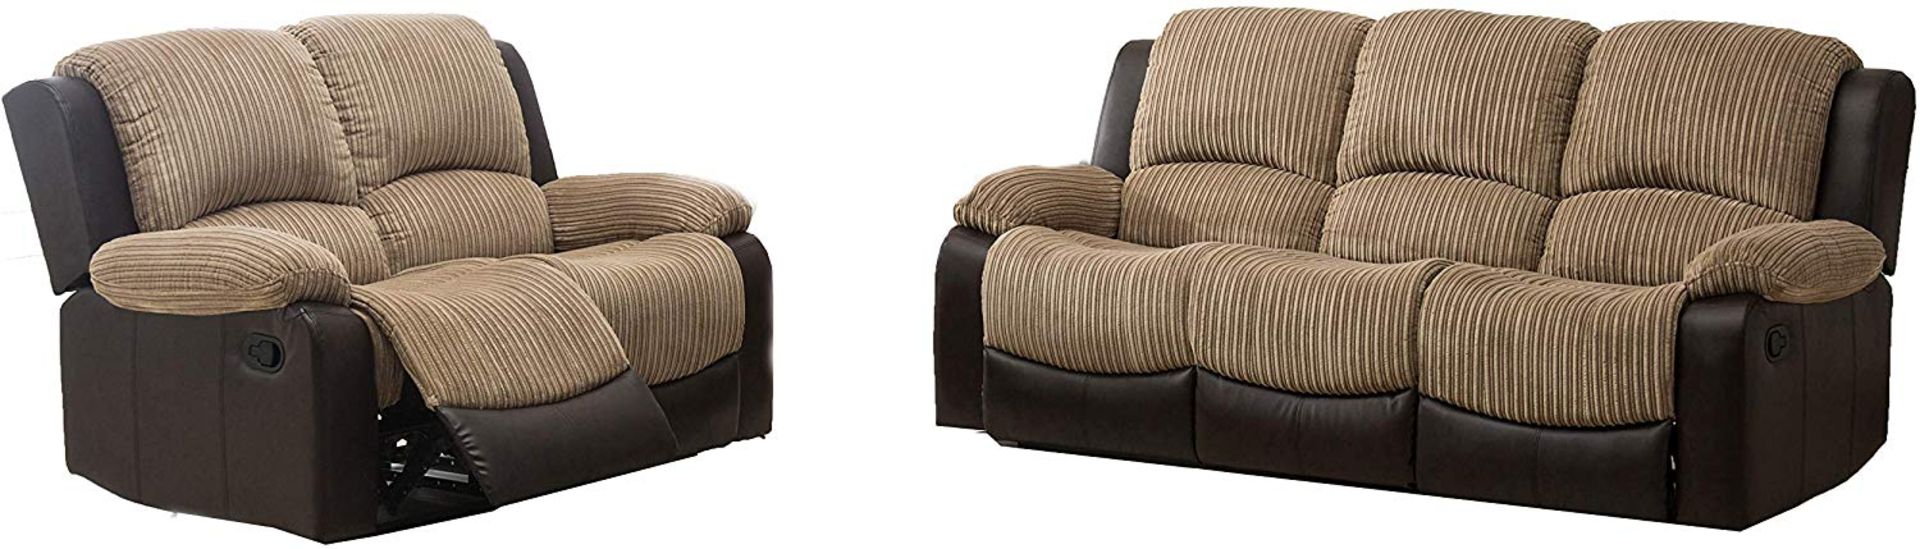 Brand new boxed 3 seater plus 2 seater california reclining sofas in brown/moccha